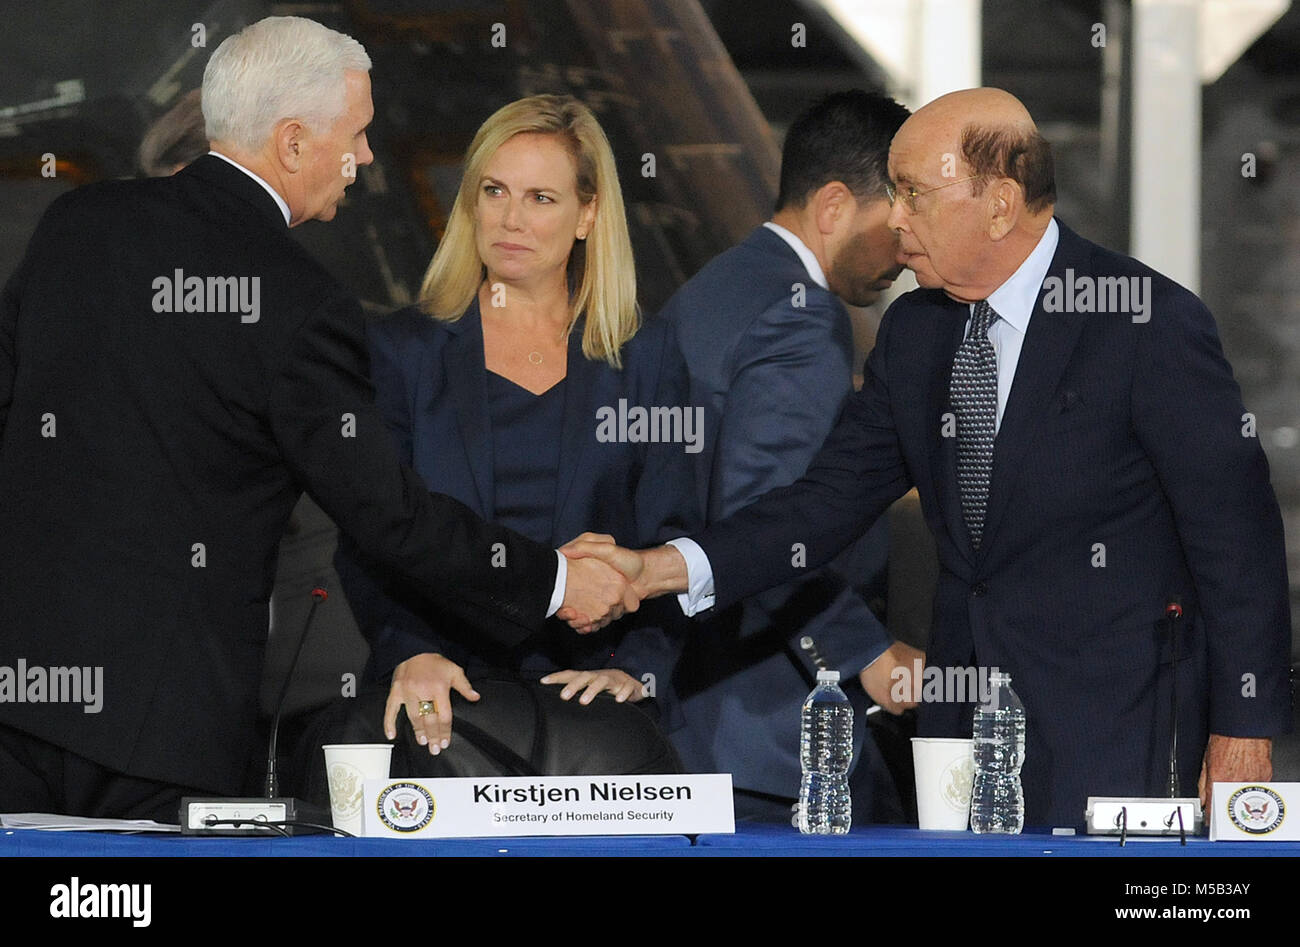 February 21, 2018 - Kennedy Space Center, Florida, United States -  U.S. Vice President Mike Pence (left) shakes hands with Secretary of Commerce Wilbur Ross as Secretary of Homeland Security Kirstjen Nielsen looks on at the conclusion of the second meeting of the National Space Council on February 21, 2018 at the Kennedy Space Center in Florida. The Trump administration re-established the council in June, 2017. (Paul Hennessy/Alamy) Stock Photo